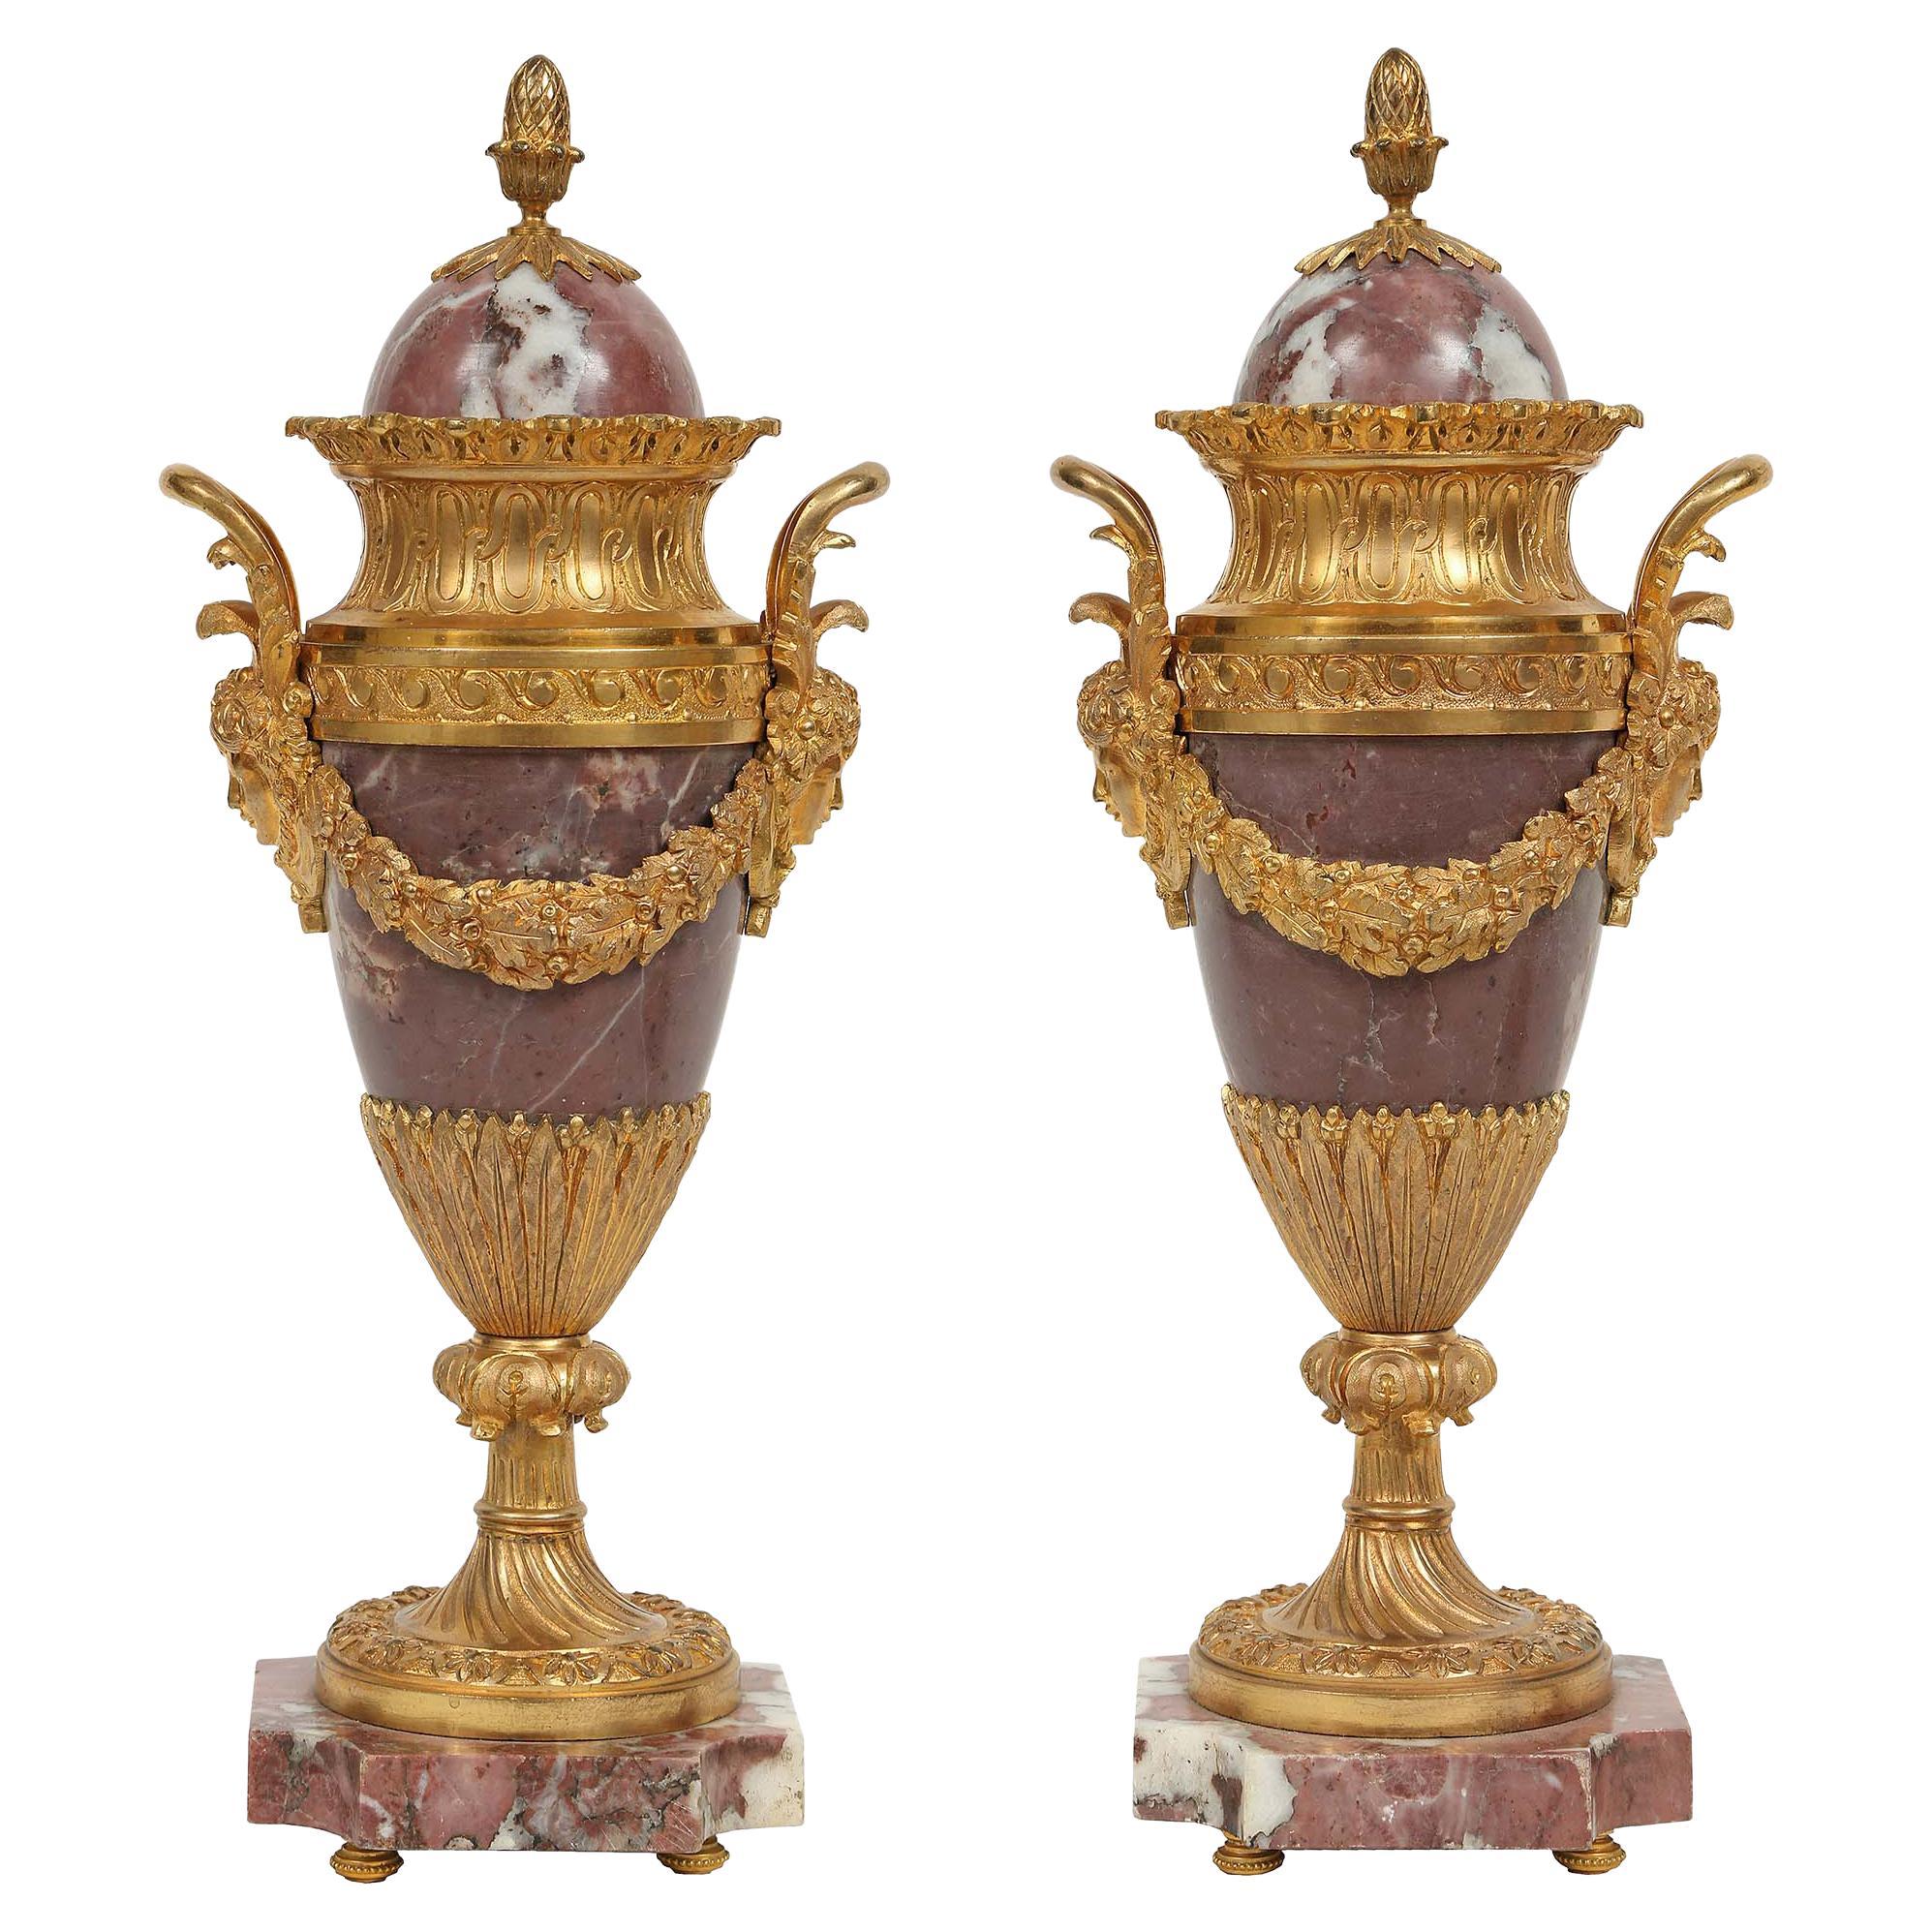 Pair of French Mid-19th Century Louis XVI Style Marble and Ormolu Cassolettes